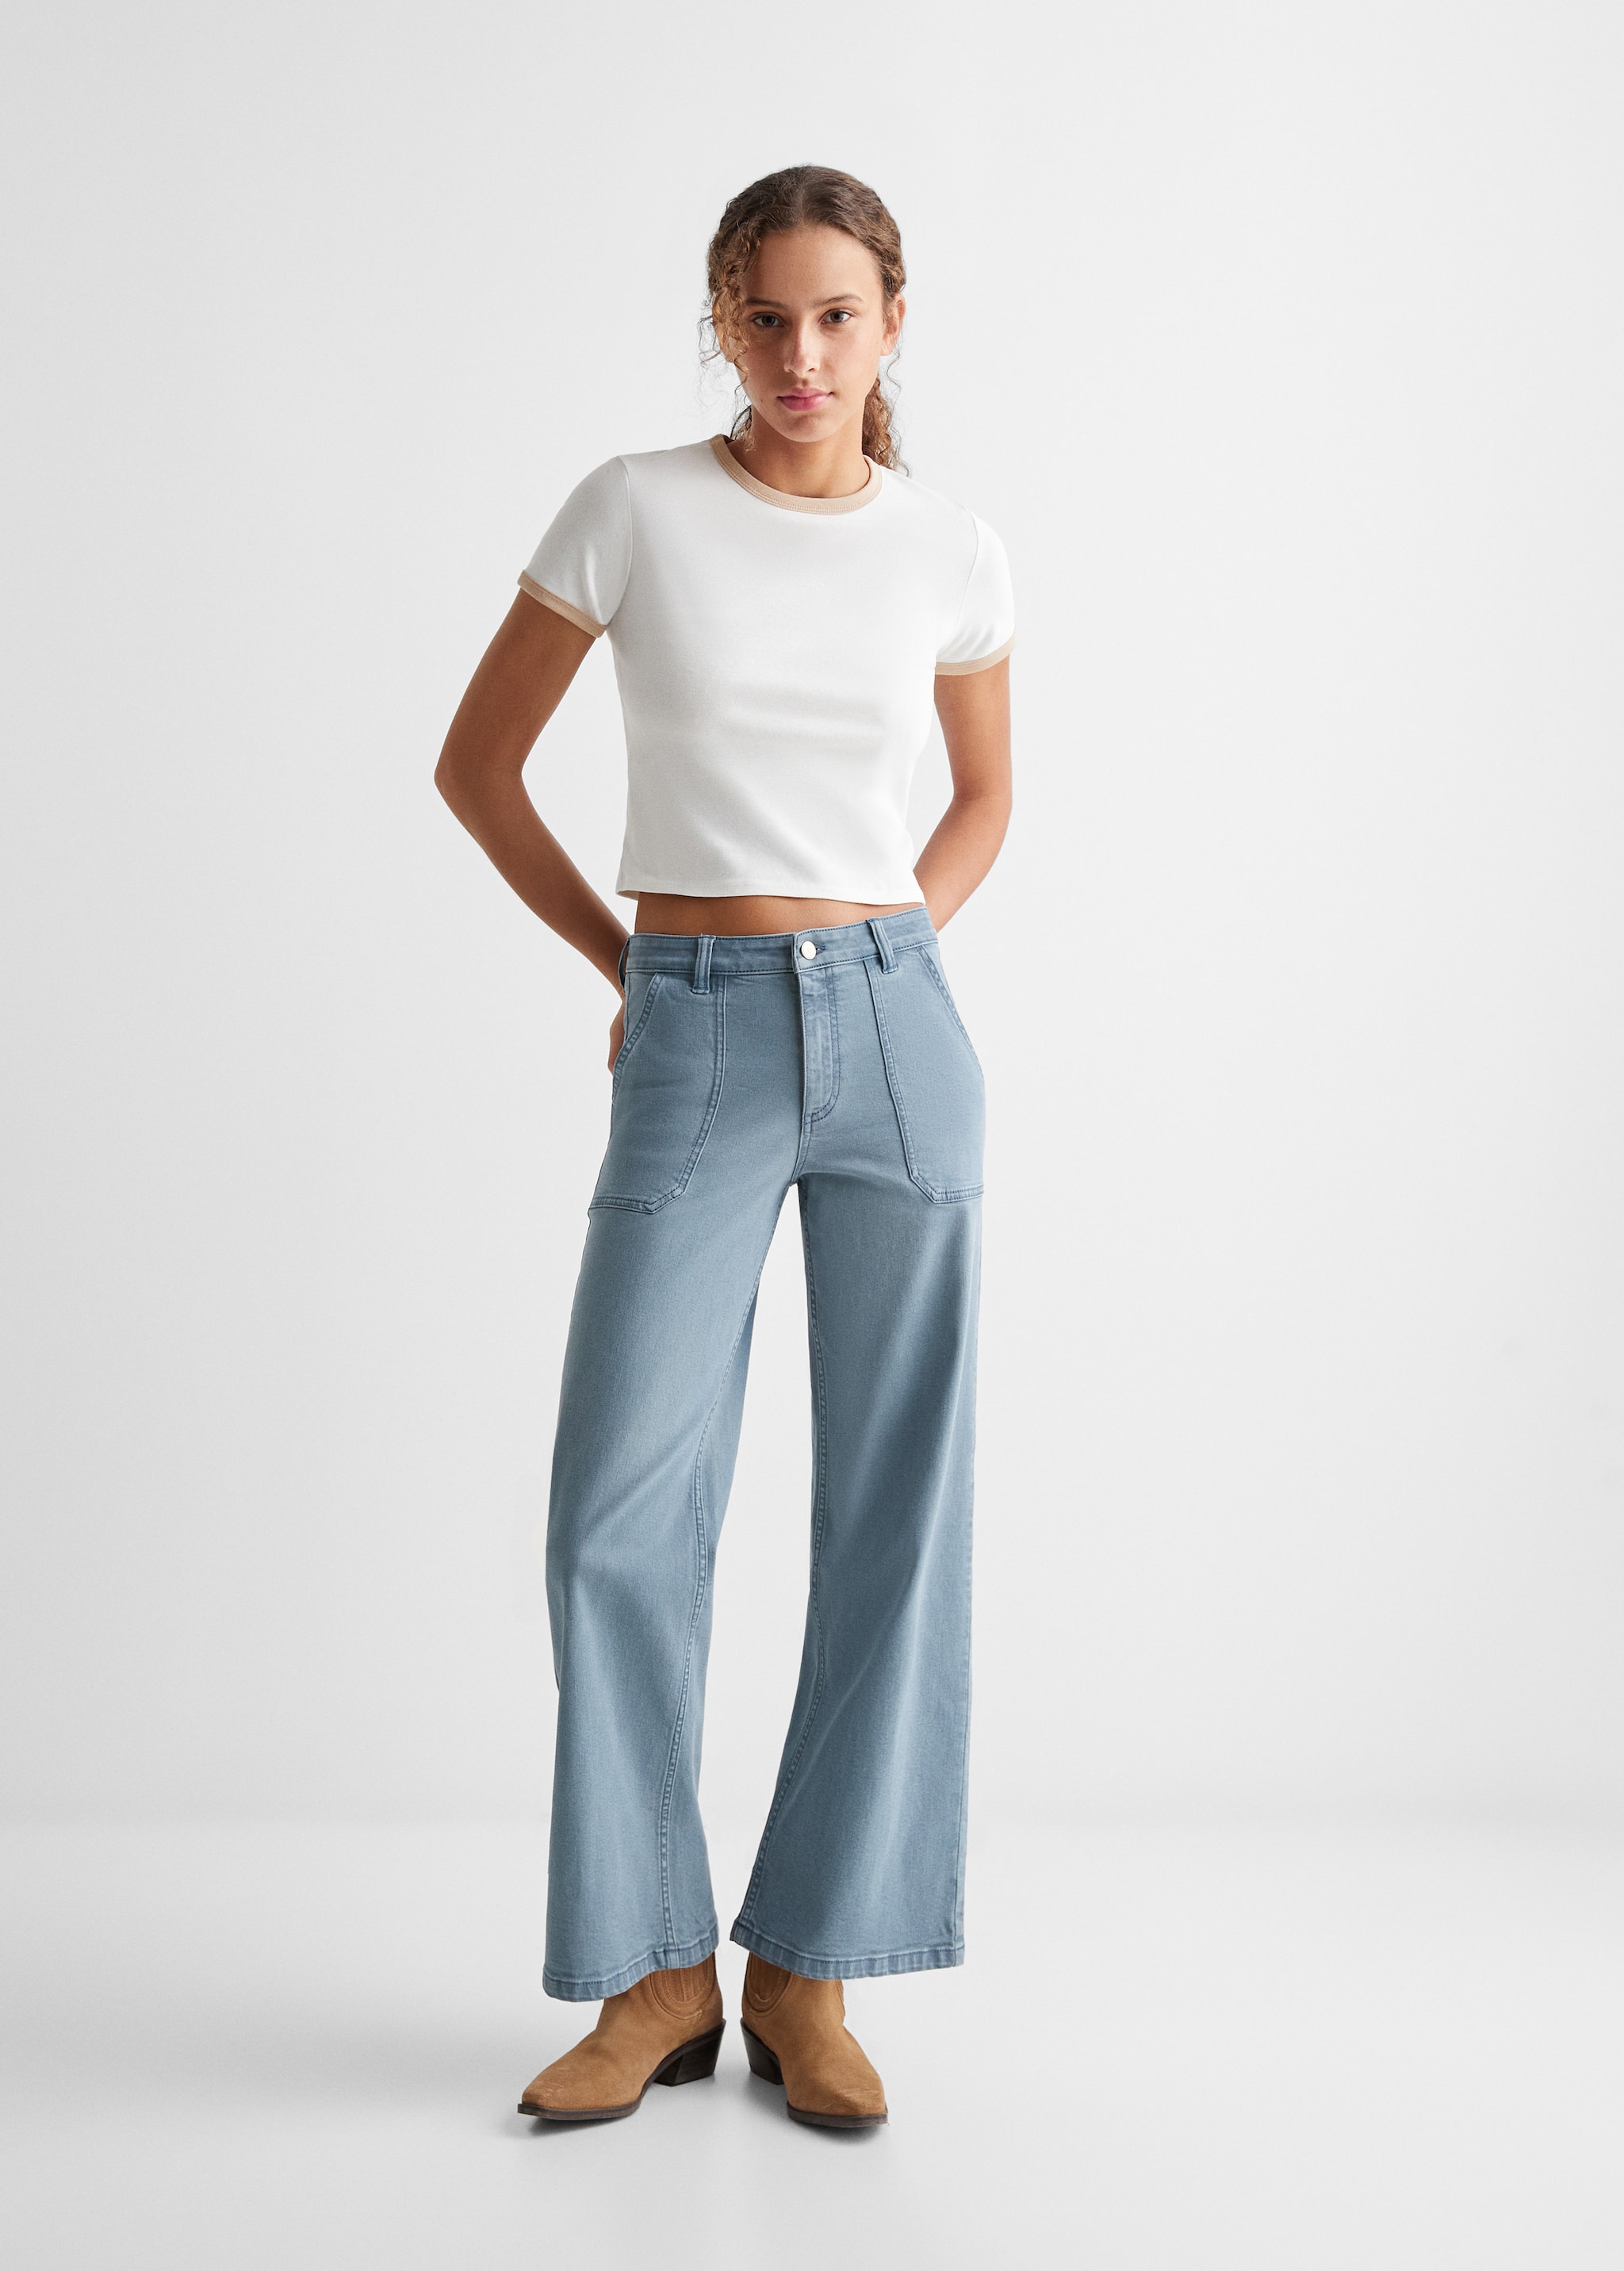 Culotte trousers with pockets - General plane